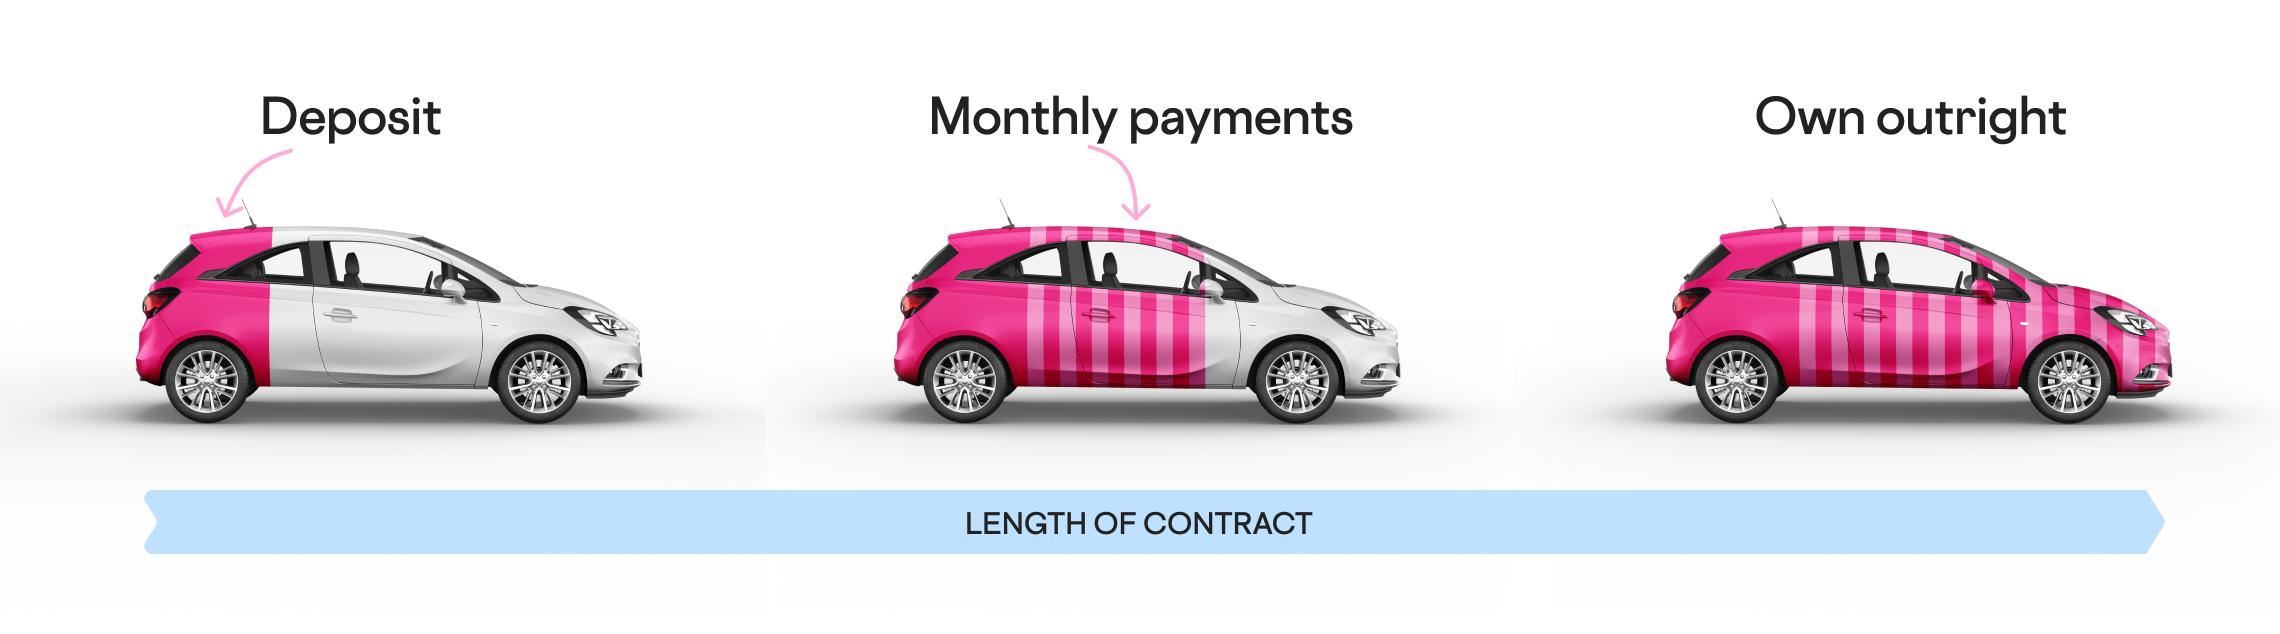 Diagram illustrating how hire purchase finance works